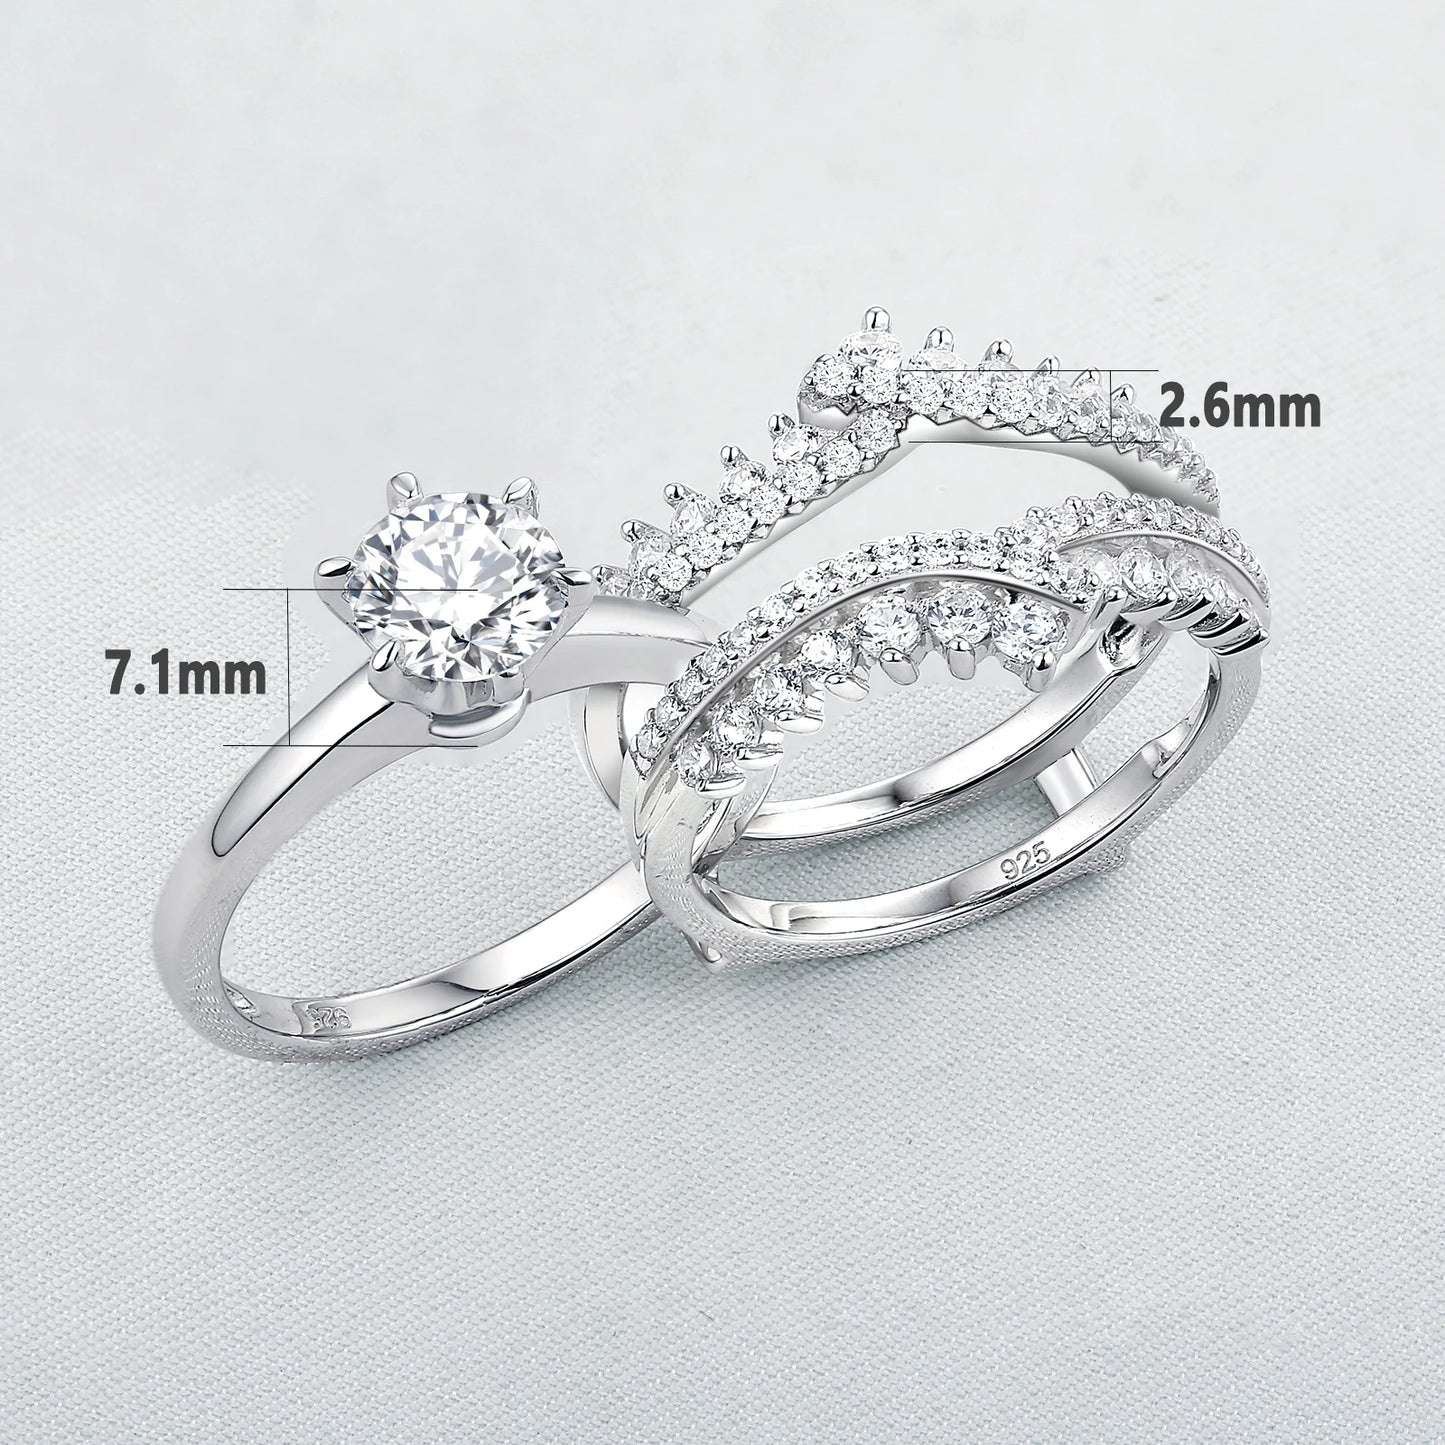 “Royalty” Sterling Silver Detachable 2 Piece Engagement Ring